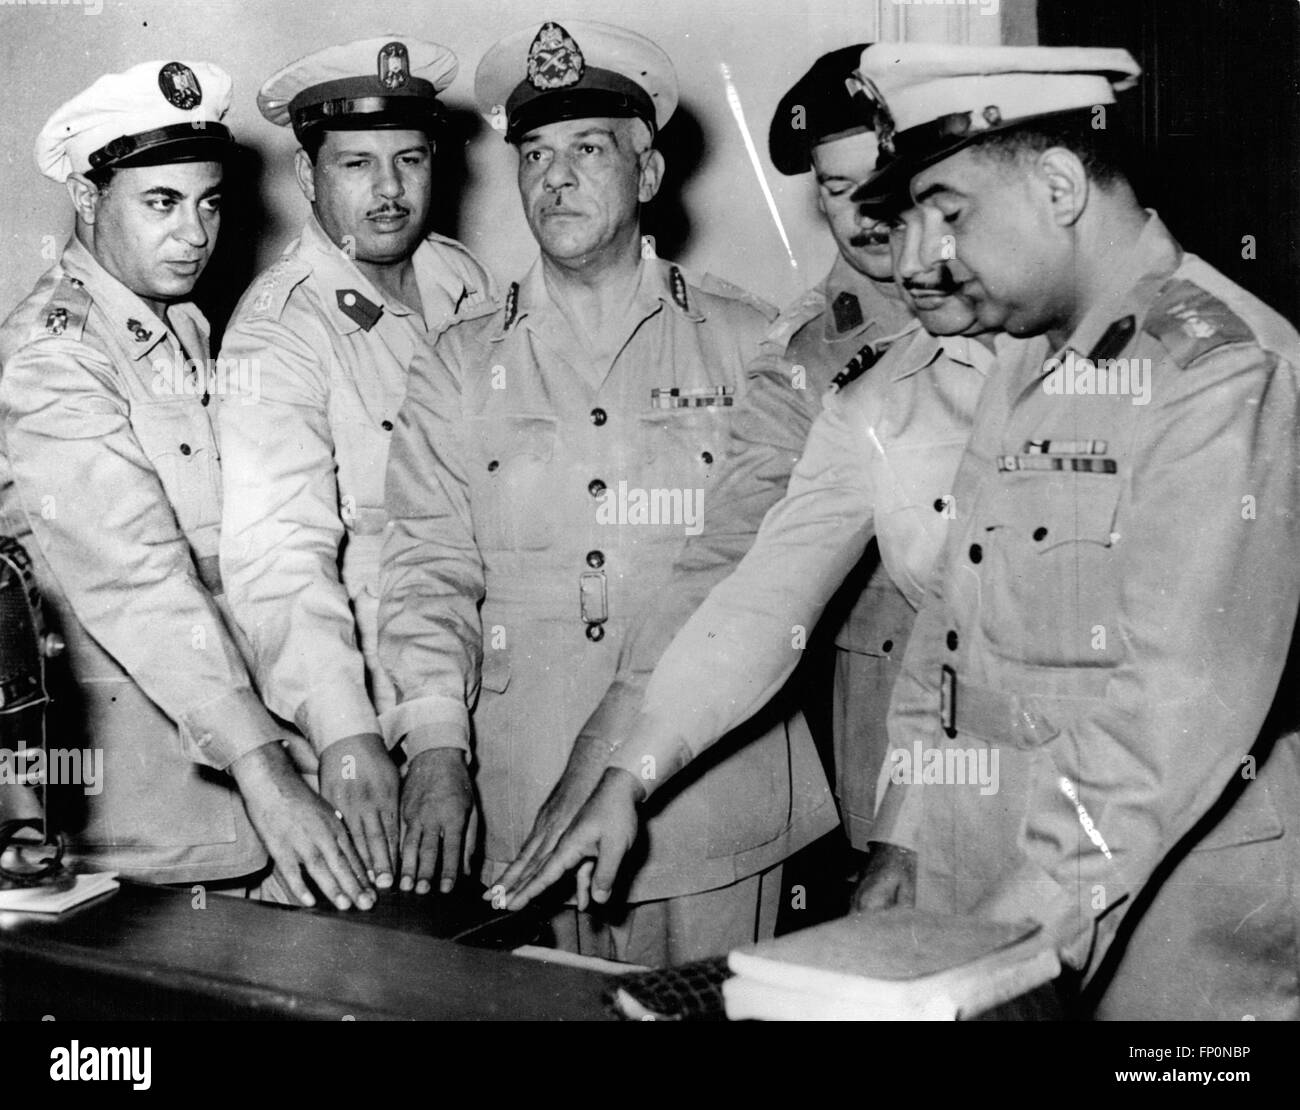 1952 - Twelve Accused In Cairo Conspiracy Case. Alleged Plot To Kill President Nasser. Twelve people are facing trial in Cairo - accused of attempting to overthrow the regime and to assassinate Colonel Nasser. They are also accused of planning to free former President General Neguib from house arrest and to appoint him President - and also of planning to de-nationalise the Suez Canal. Keystone Photo Shows:- Members of the Supreme Military Court - headed by General Mohamed Fuad El Digwy - take the oath - at opening of the trial in Cairo. © Keystone Pictures USA/ZUMAPRESS.com/Alamy Live News Stock Photo